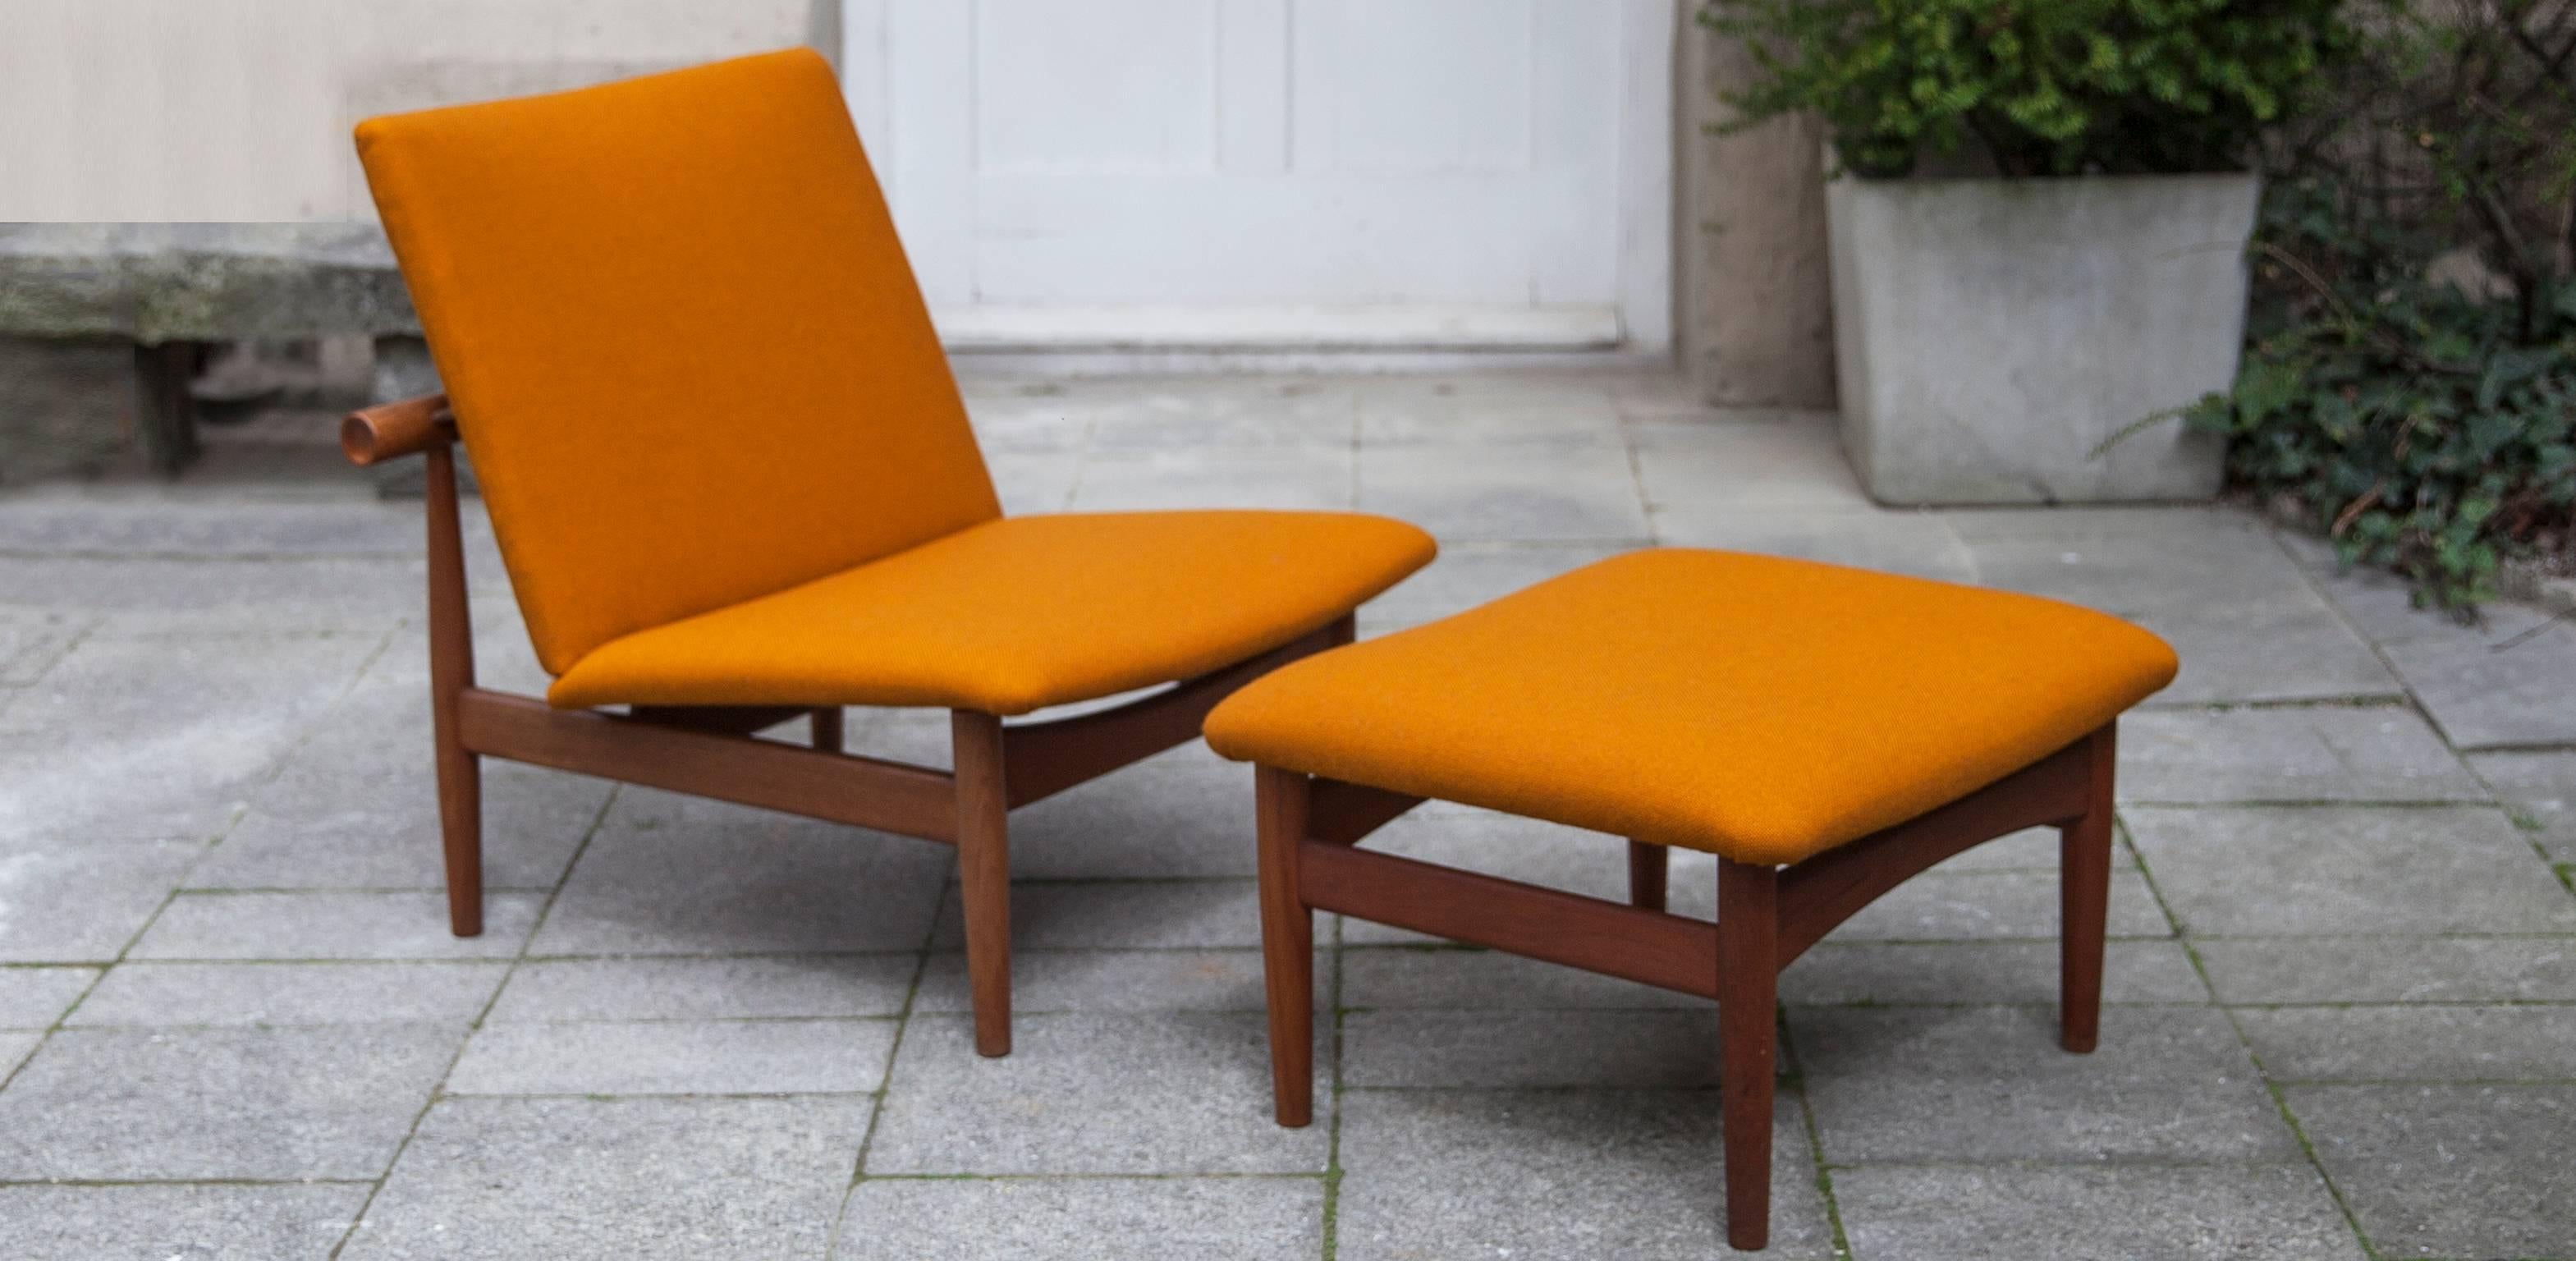 Rare Finn Juhl lounge chair set model Japan / FD-137. The stool was produced by France and Sons and the lounge chair by France & Daverkosen in Denmark in 1953. Solid teak frame and the set is reupholstered in Kvadrat wool fabric. Highly sought after